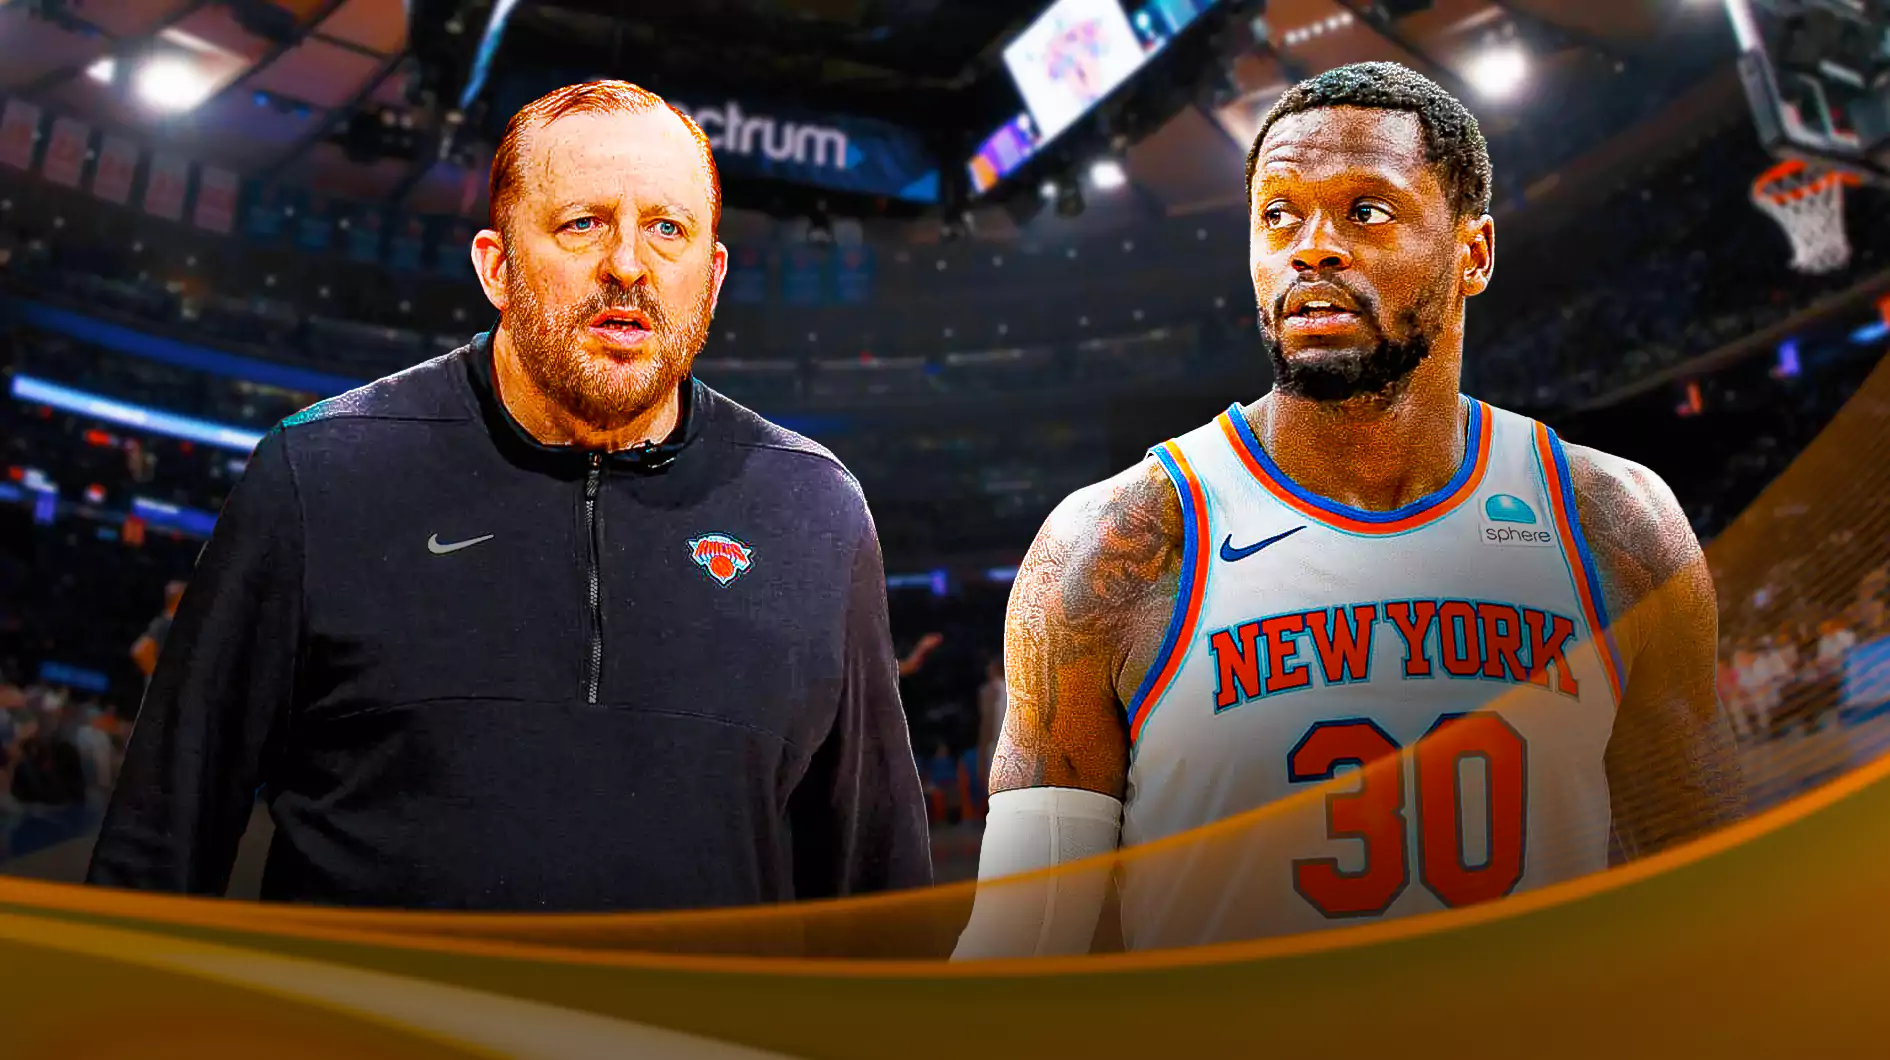 Julius Randle and Tom Thibodeau with the Knicks arena in the background, injury